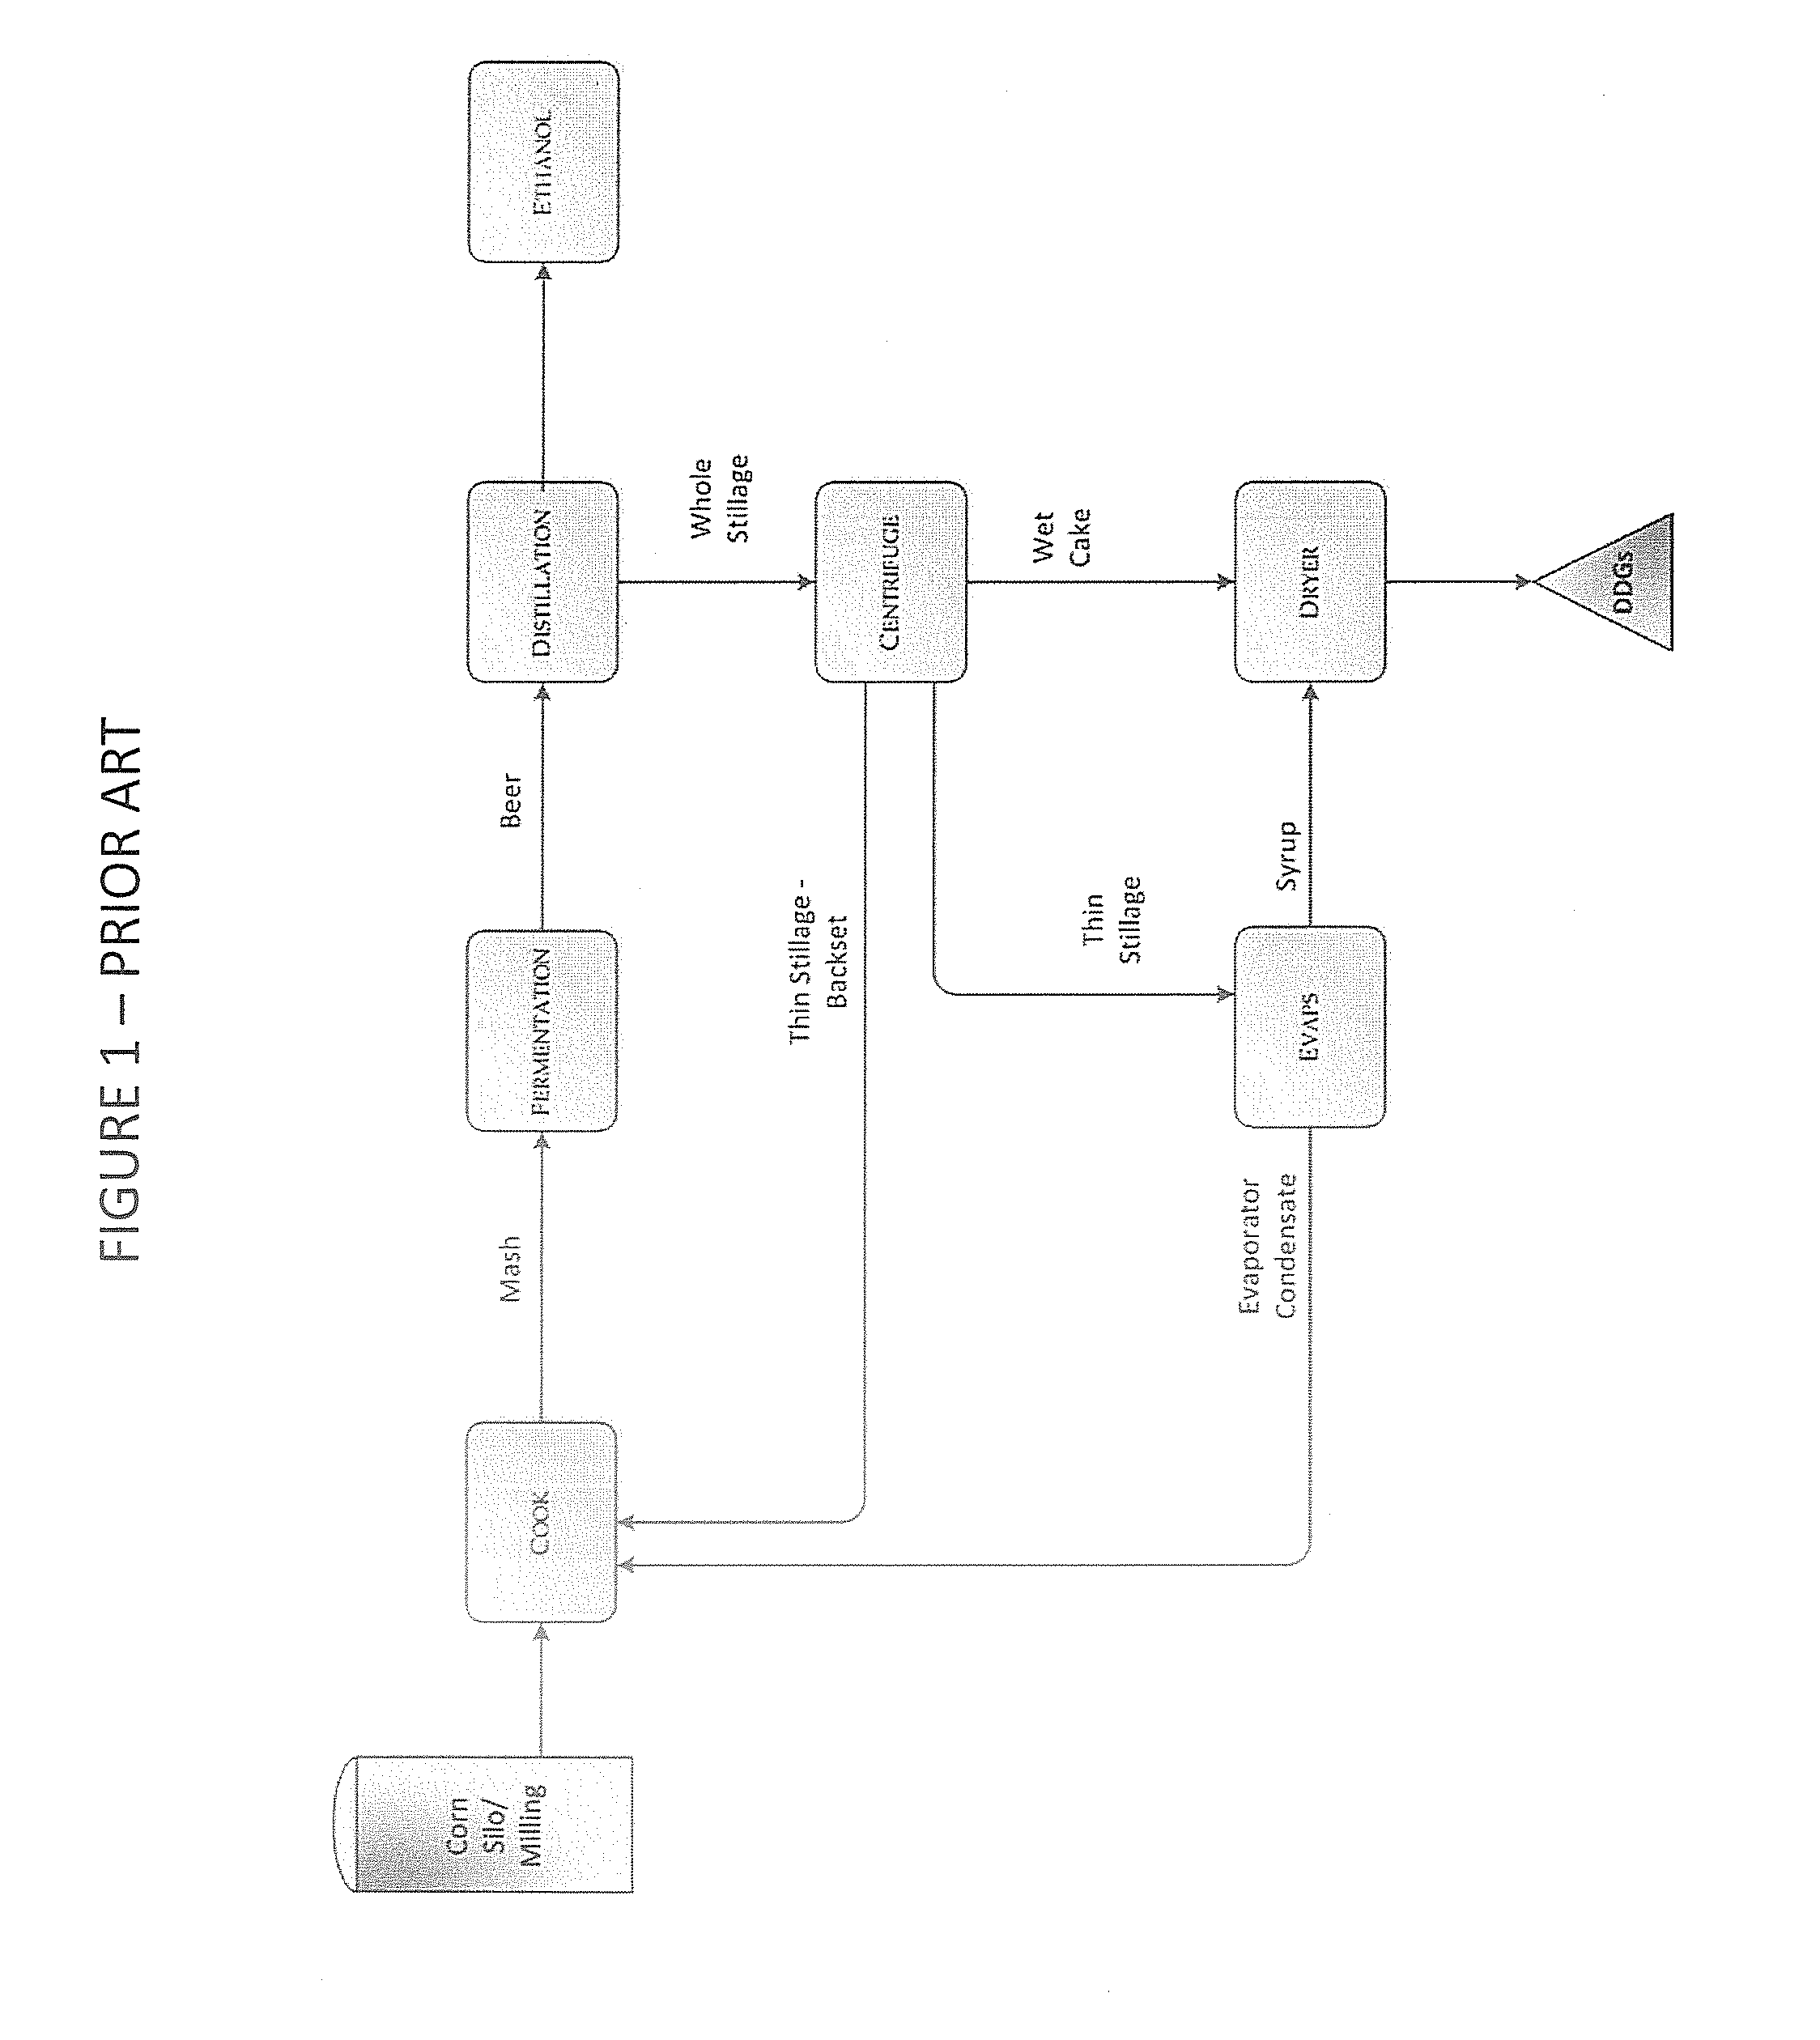 Process and method for improving the water reuse, energy efficiency, fermentation, and products of an ethanol fermentation plant